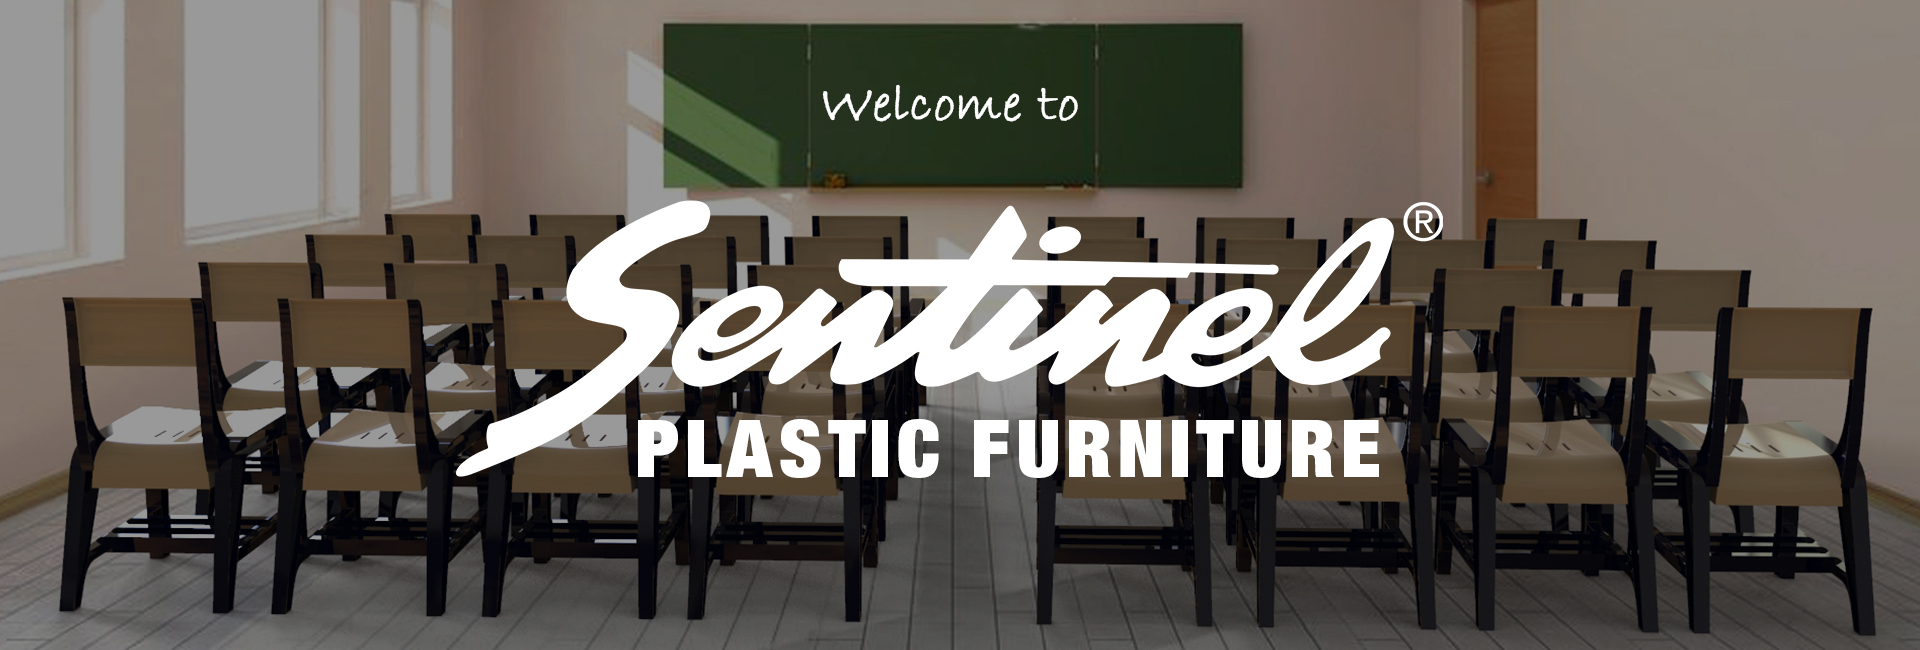 welcome-sentinel-plastic-manufacturing-corporation-cover